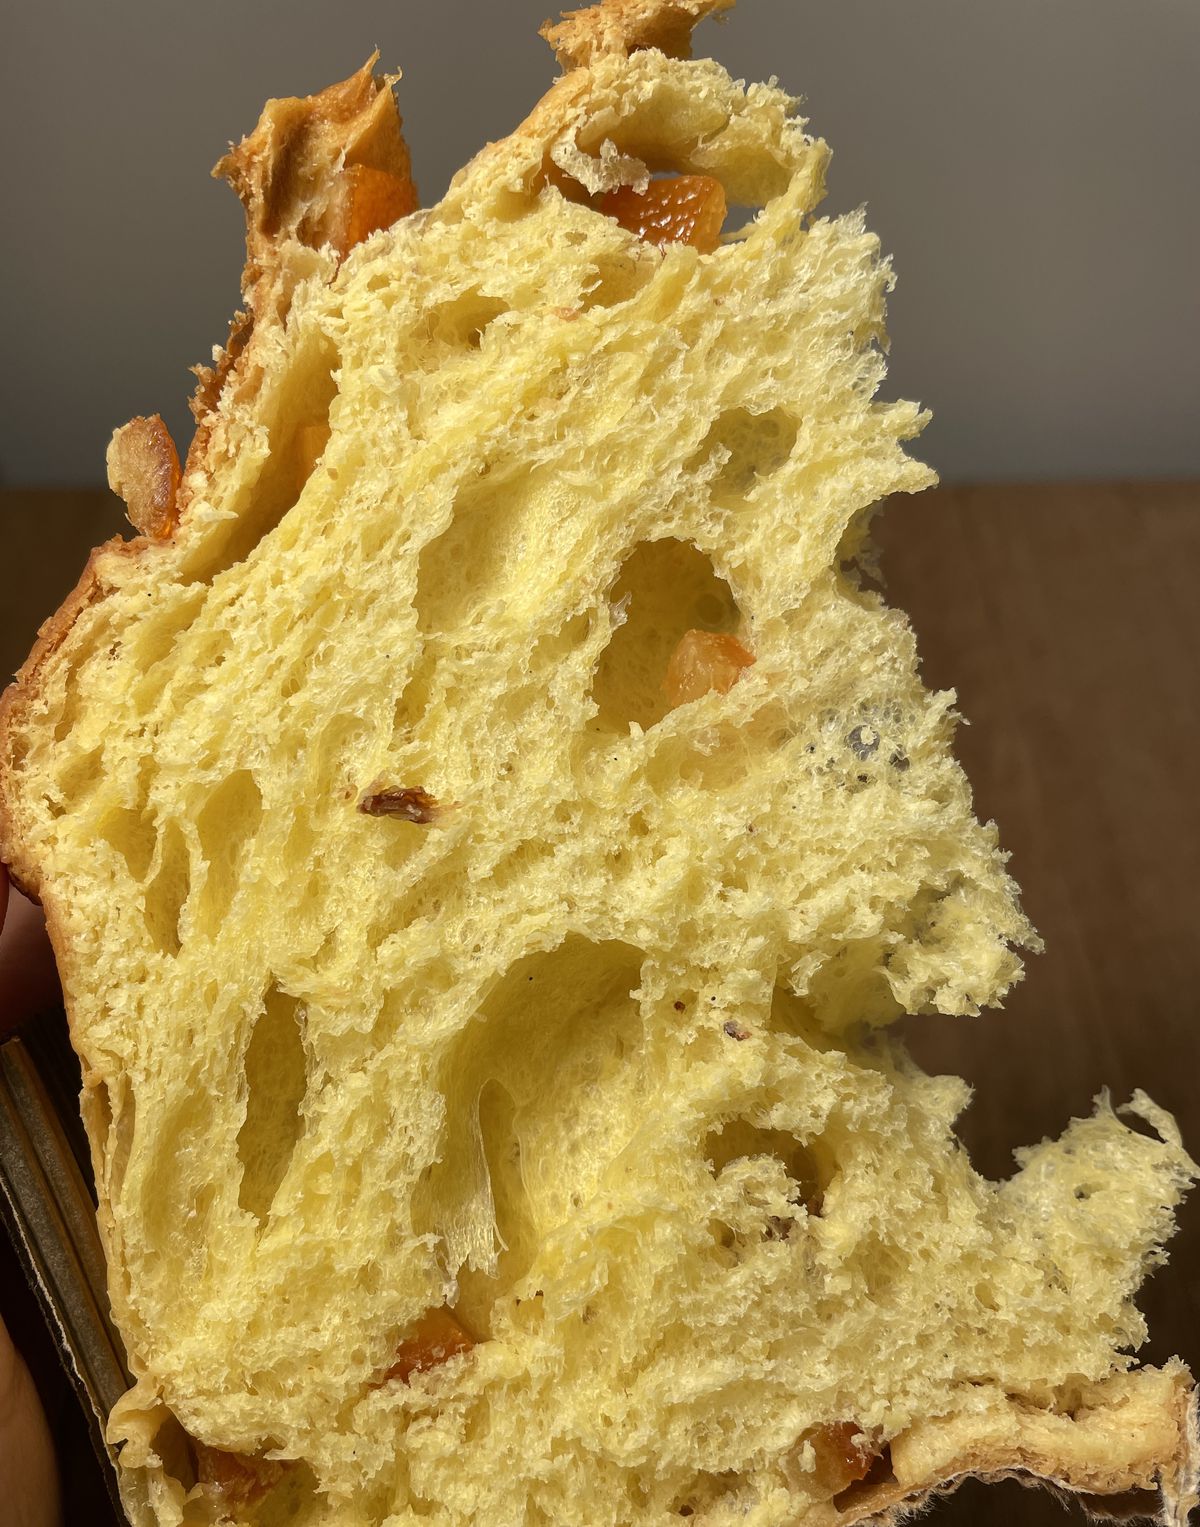 Panettone, torn away to reveal its fluffy yellow crumb.